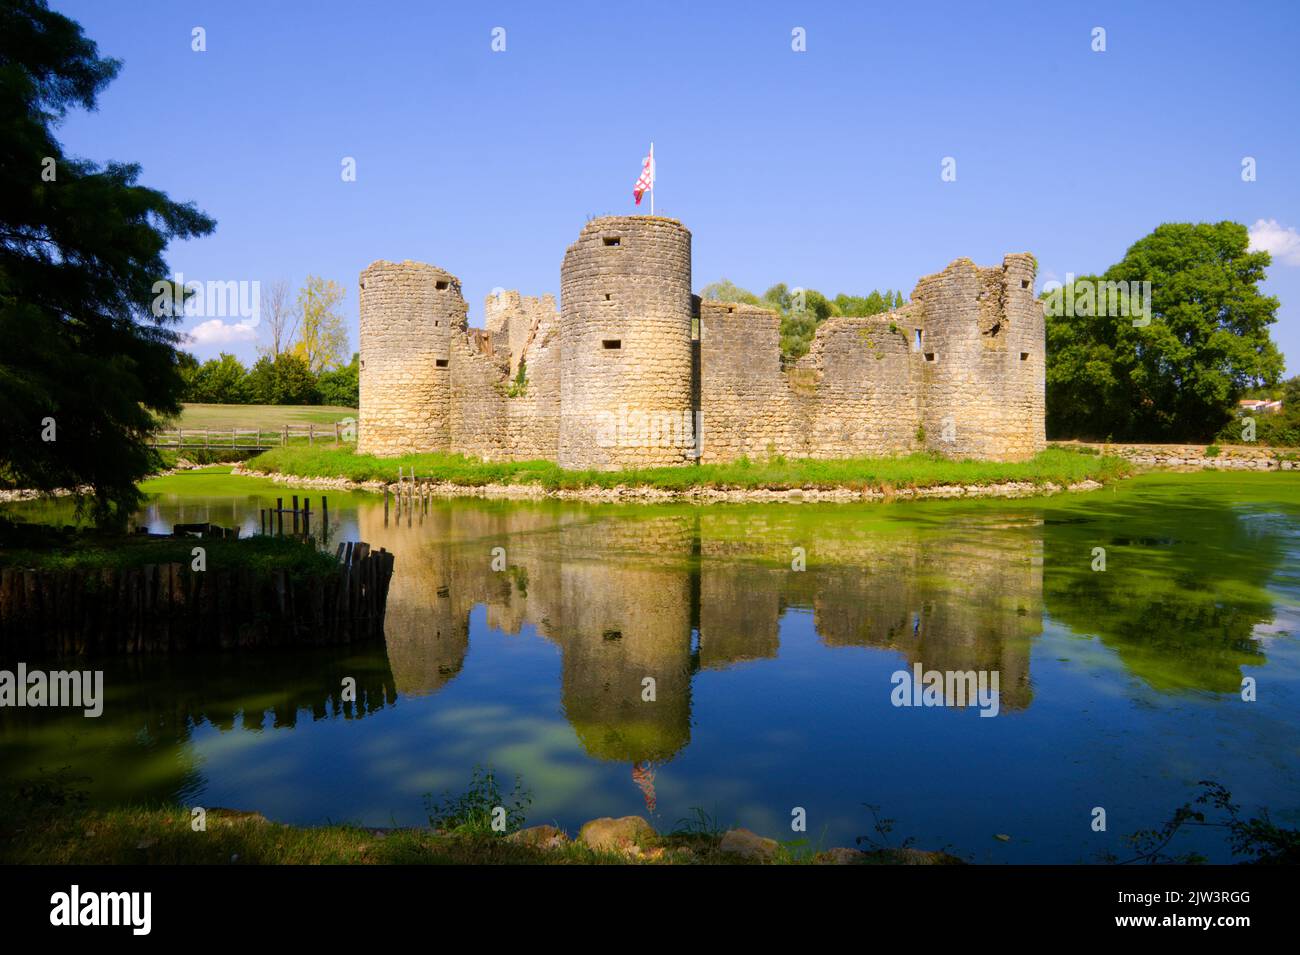 Chateau de Commequiers (Commequiers castle) in Summer, Vendee, France Stock Photo